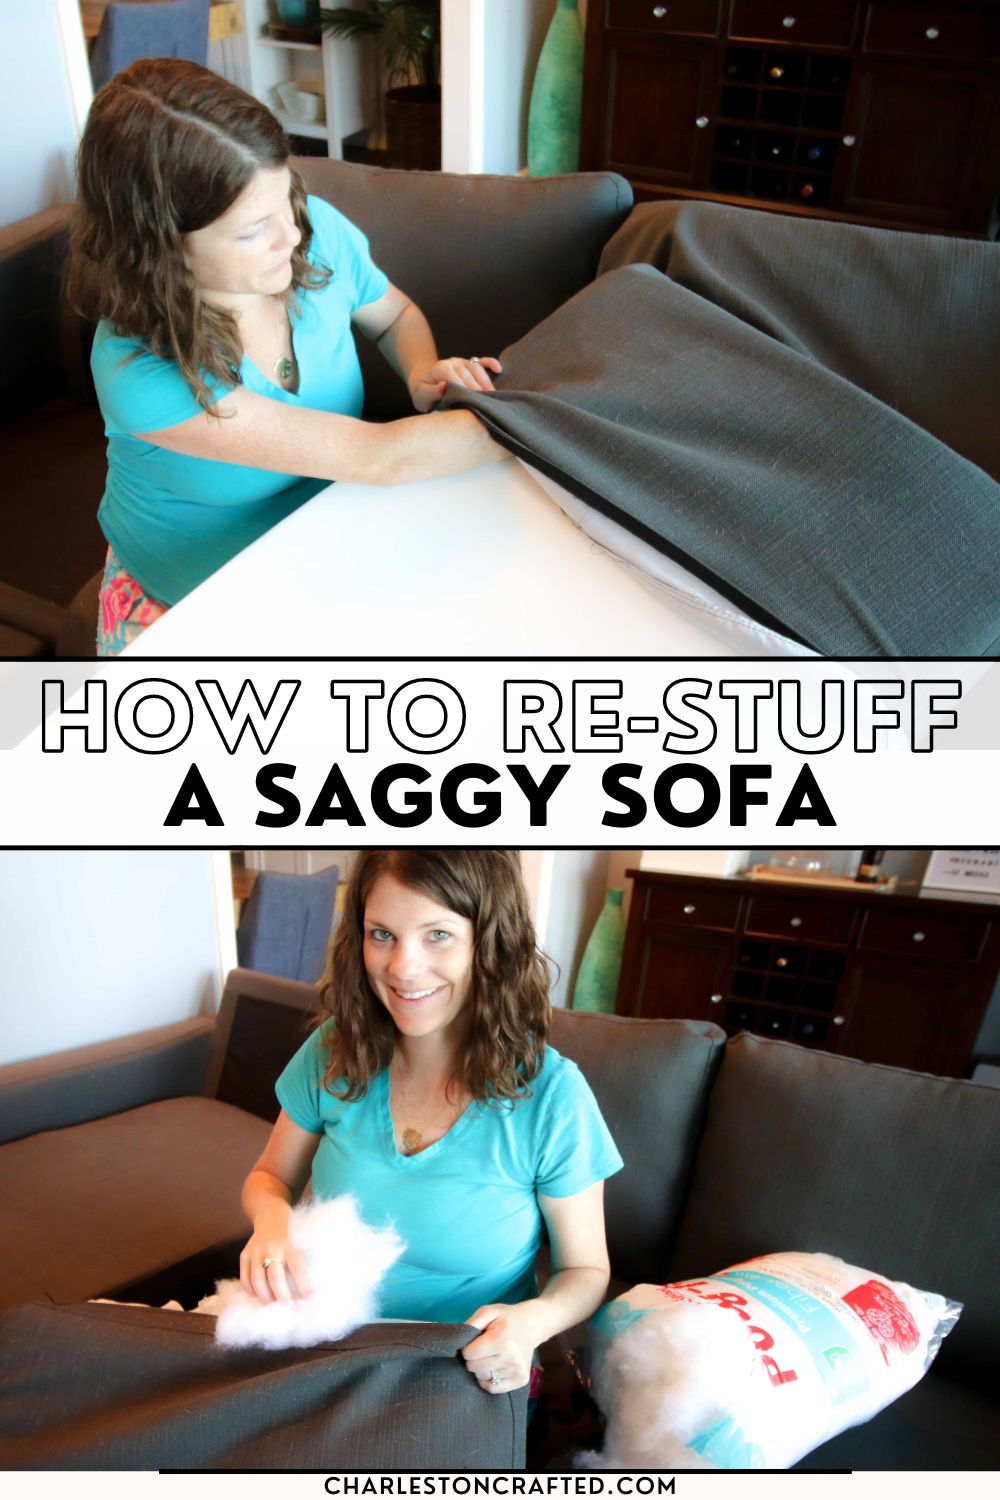 https://www.charlestoncrafted.com/wp-content/uploads/2018/09/how-to-restuff-a-saggy-sofa.jpg